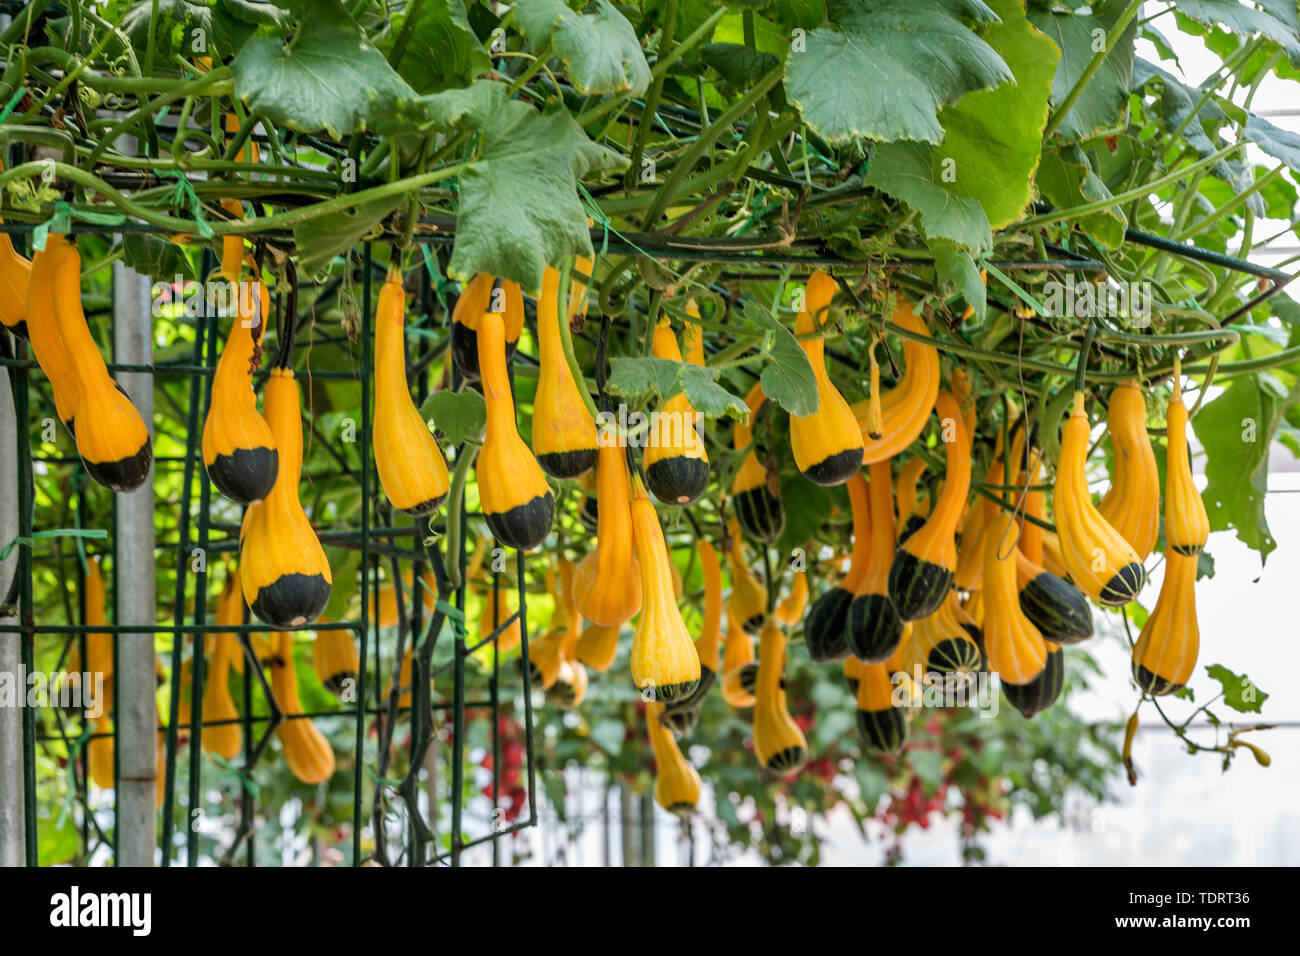 Ornamental pumpkin cultivation, photographed at Shandong Shouguang Cuisine Expo Stock Photo